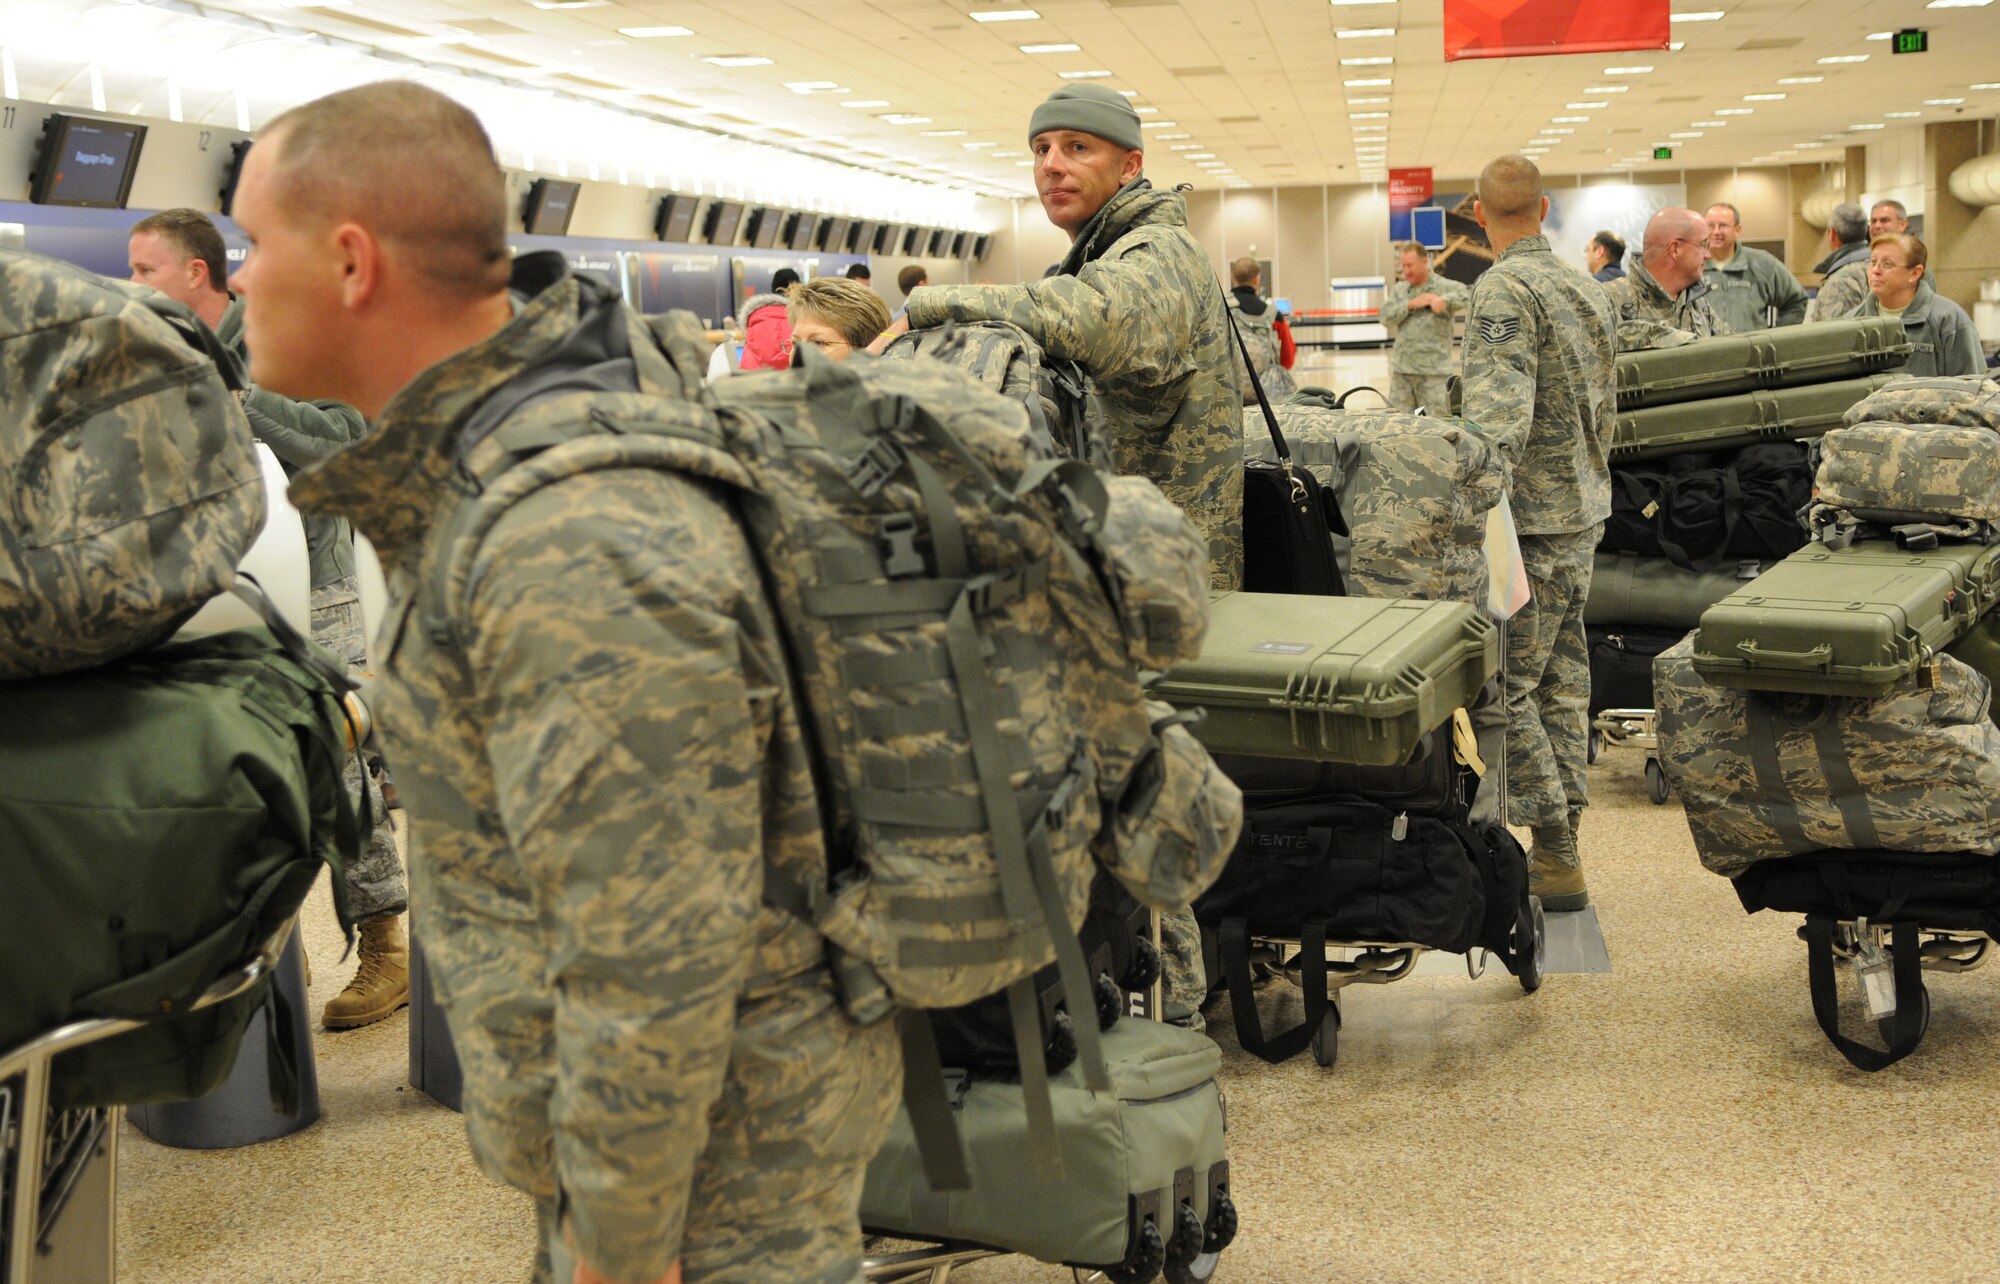 Guardsmen from the Utah Air National Guard's 151st Security Forces Squadron wait in line to check their bags before boarding their flight. The 151st SFS left for a six-month deployment to Iraq, on February 3, 2011, from the Salt Lake City International airport. (U.S. Air Force photo by Master Sgt. Gary J. Rihn)(RELEASED)